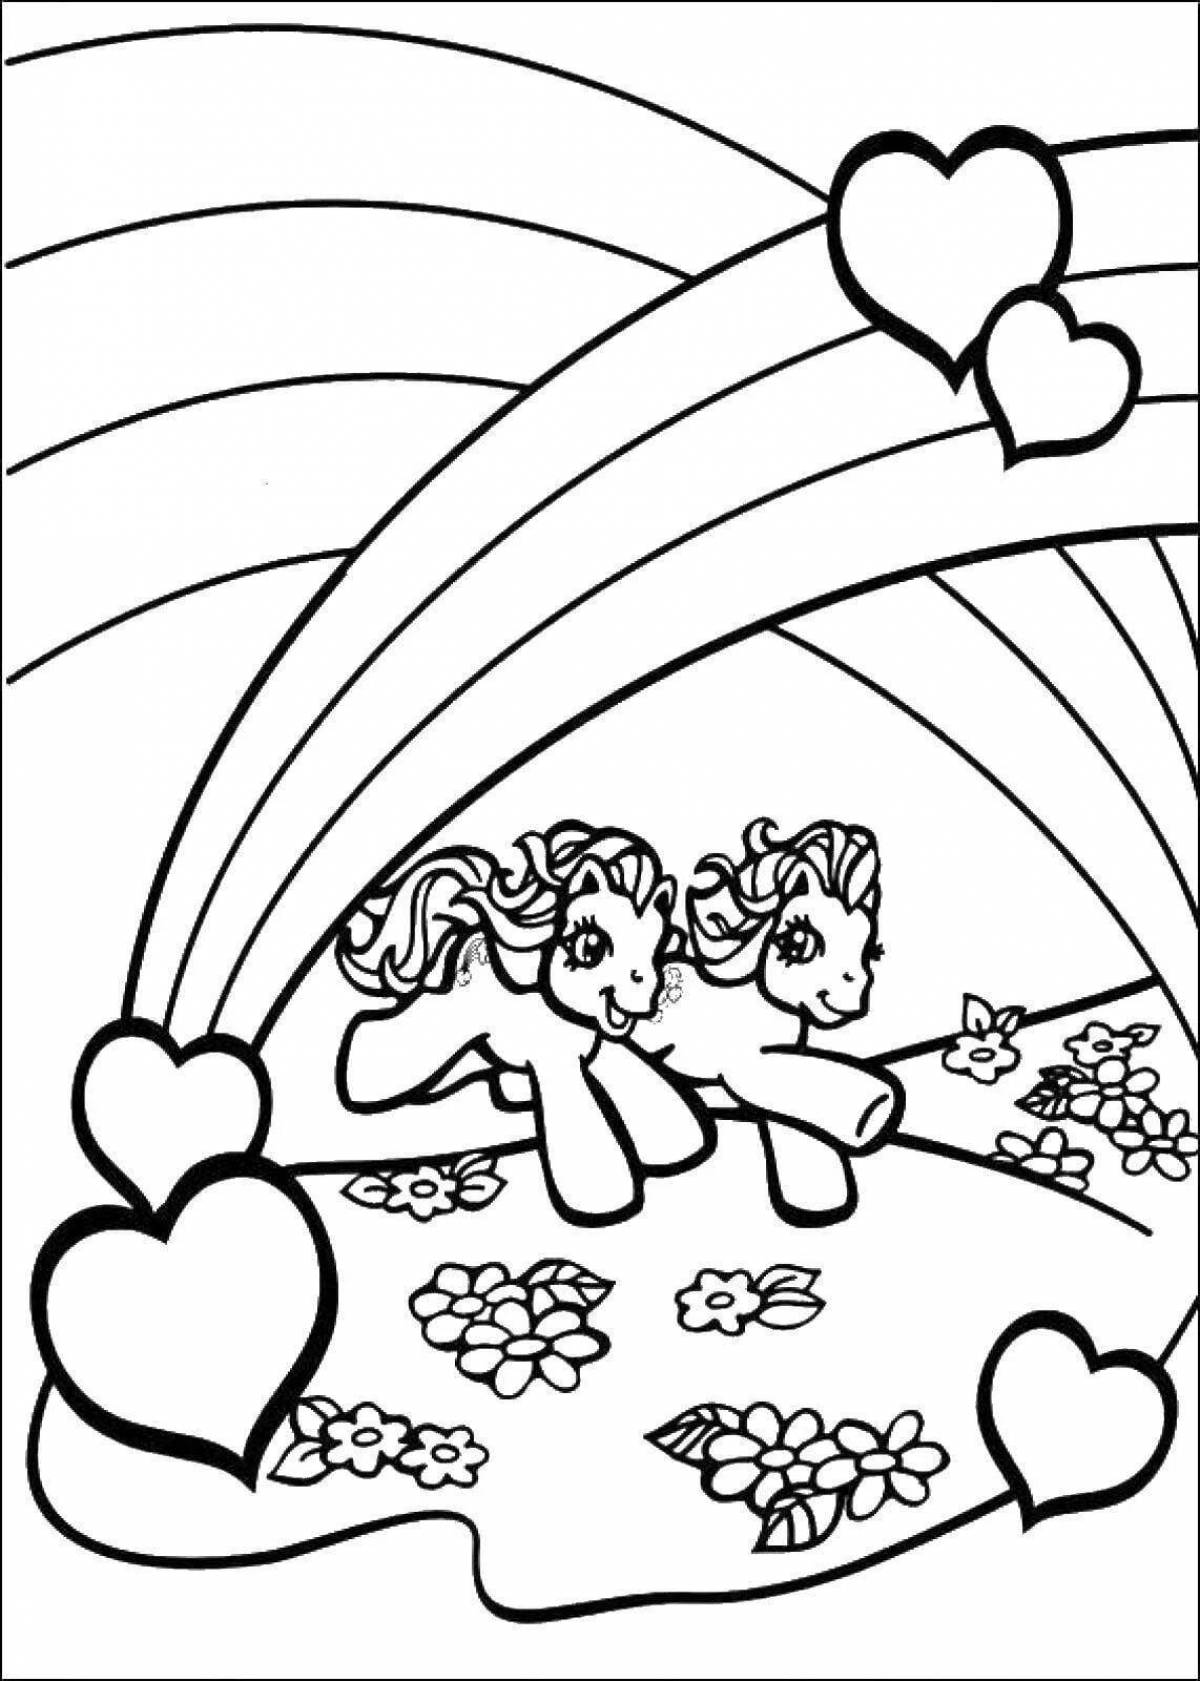 Rough rainbow friends coloring page